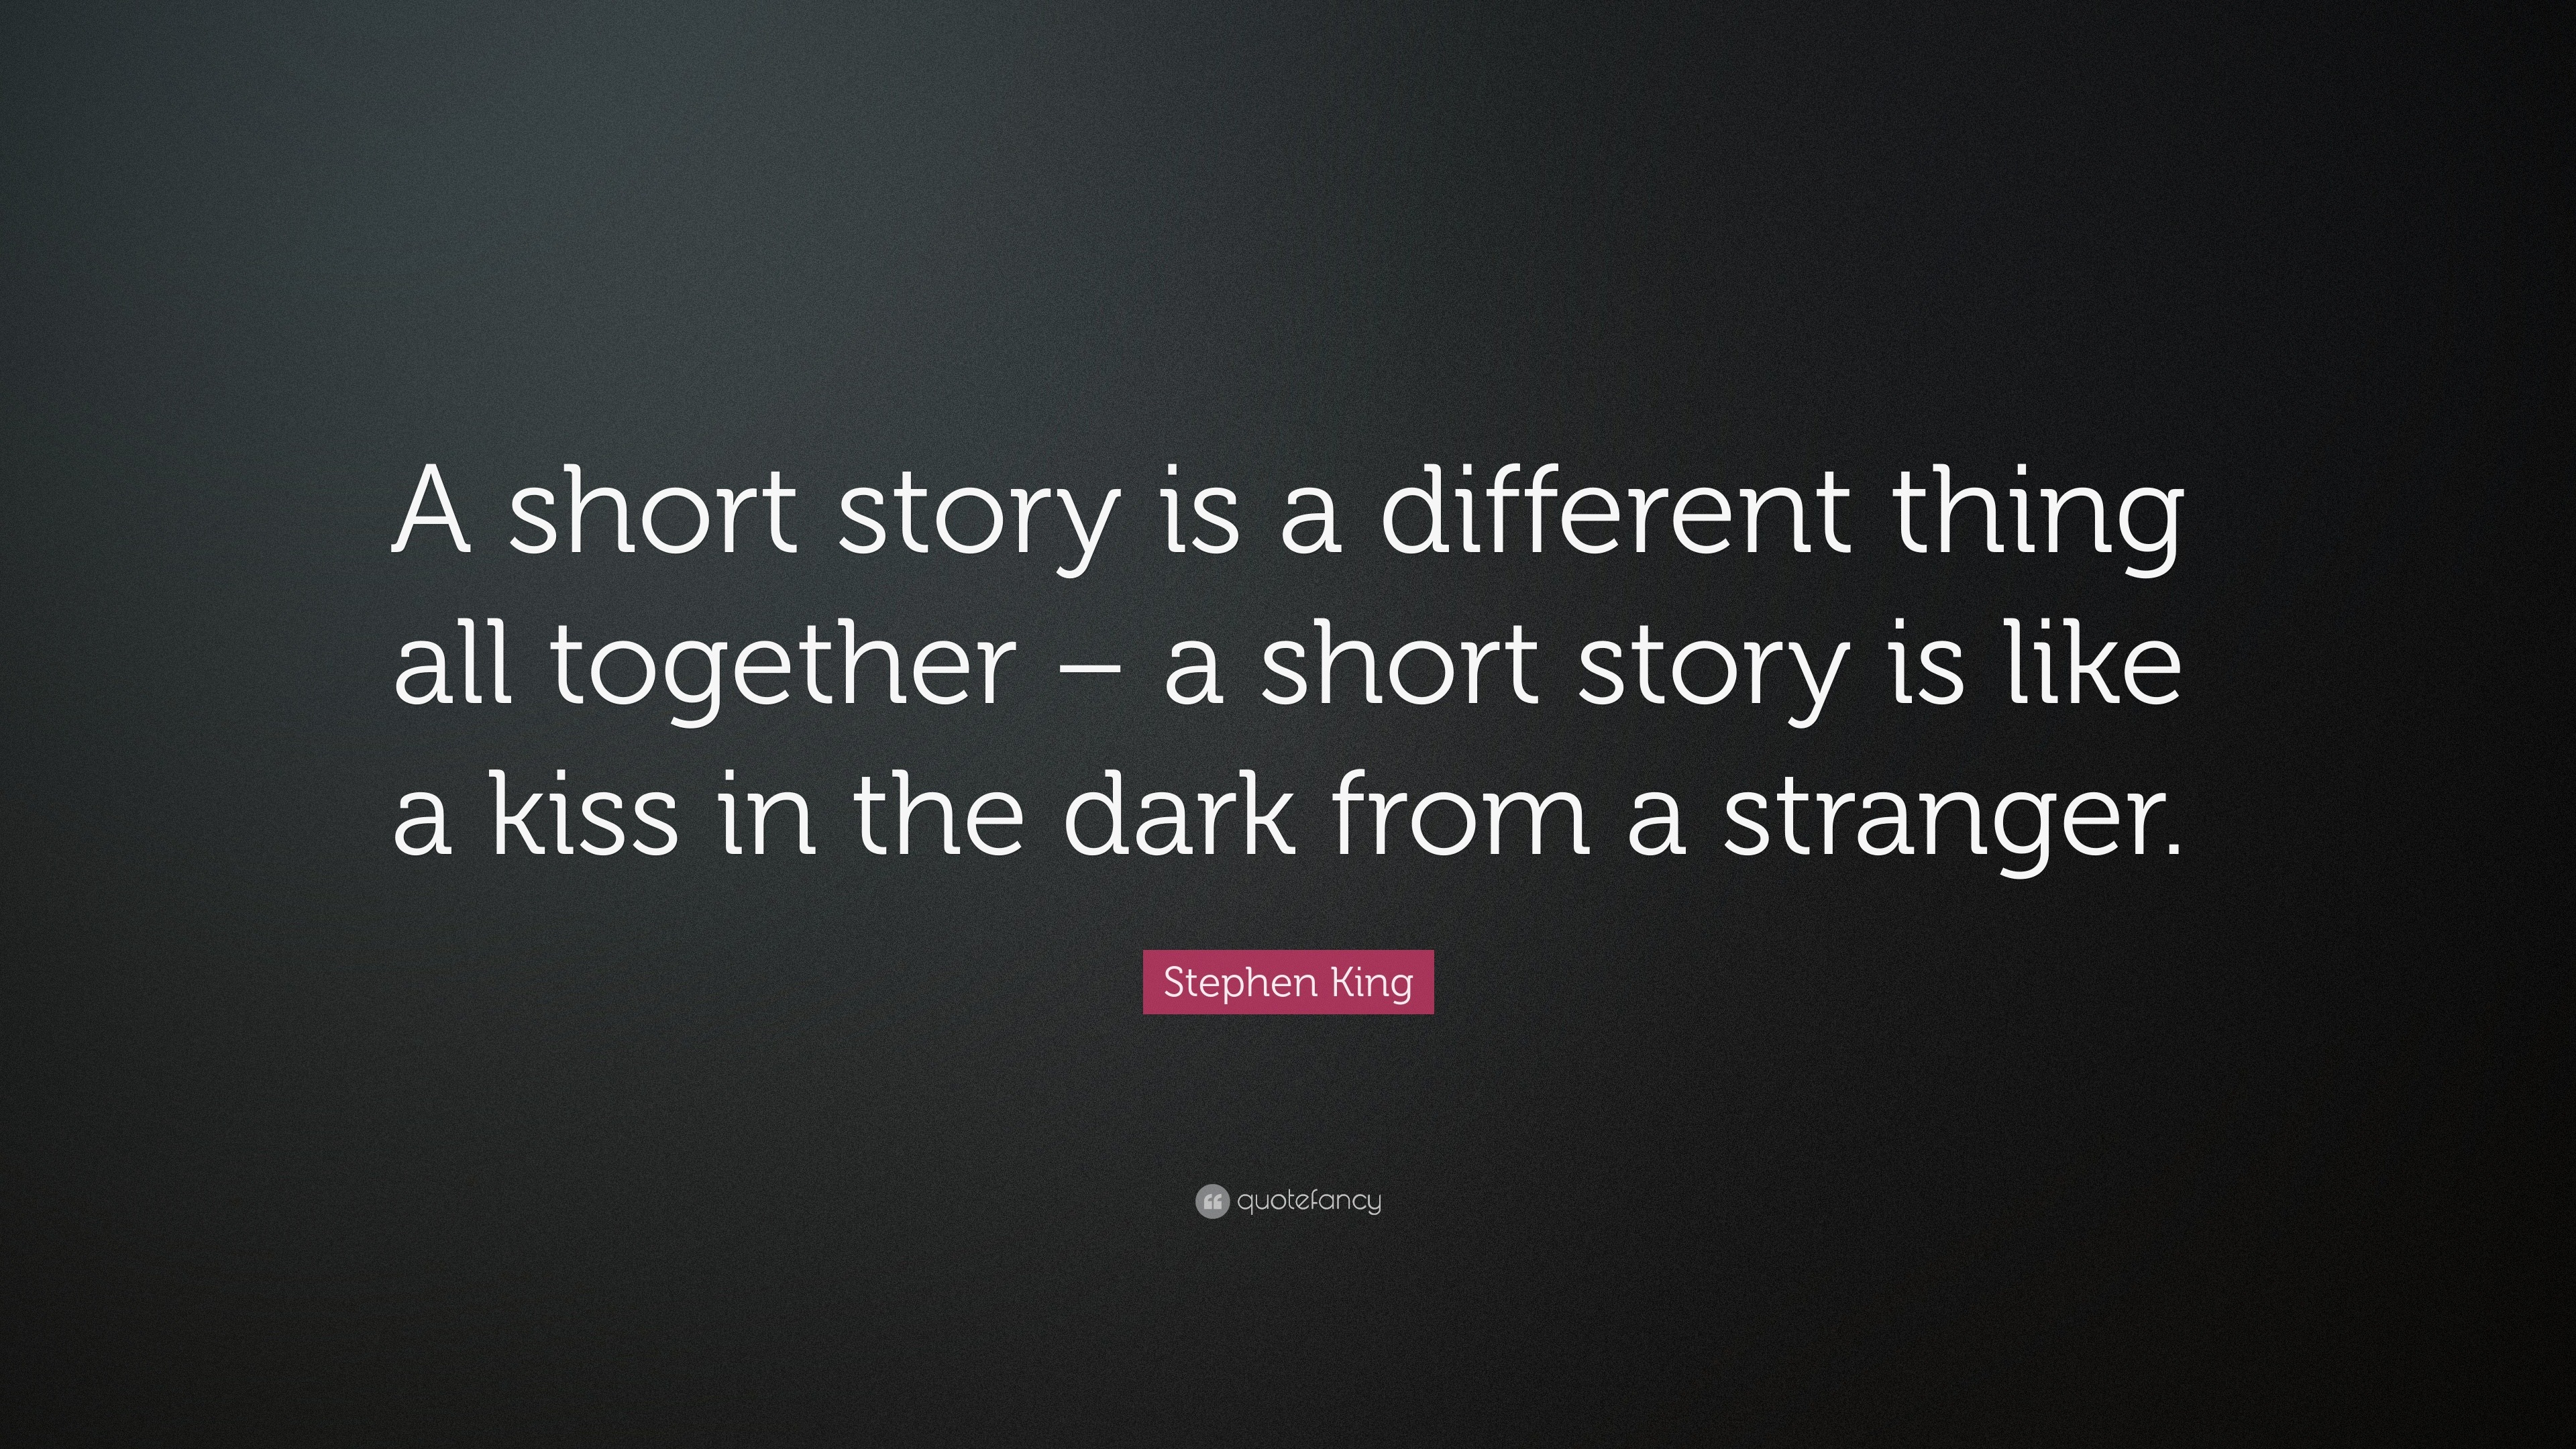 Stephen King Quote: “A short story is a different thing all together ...